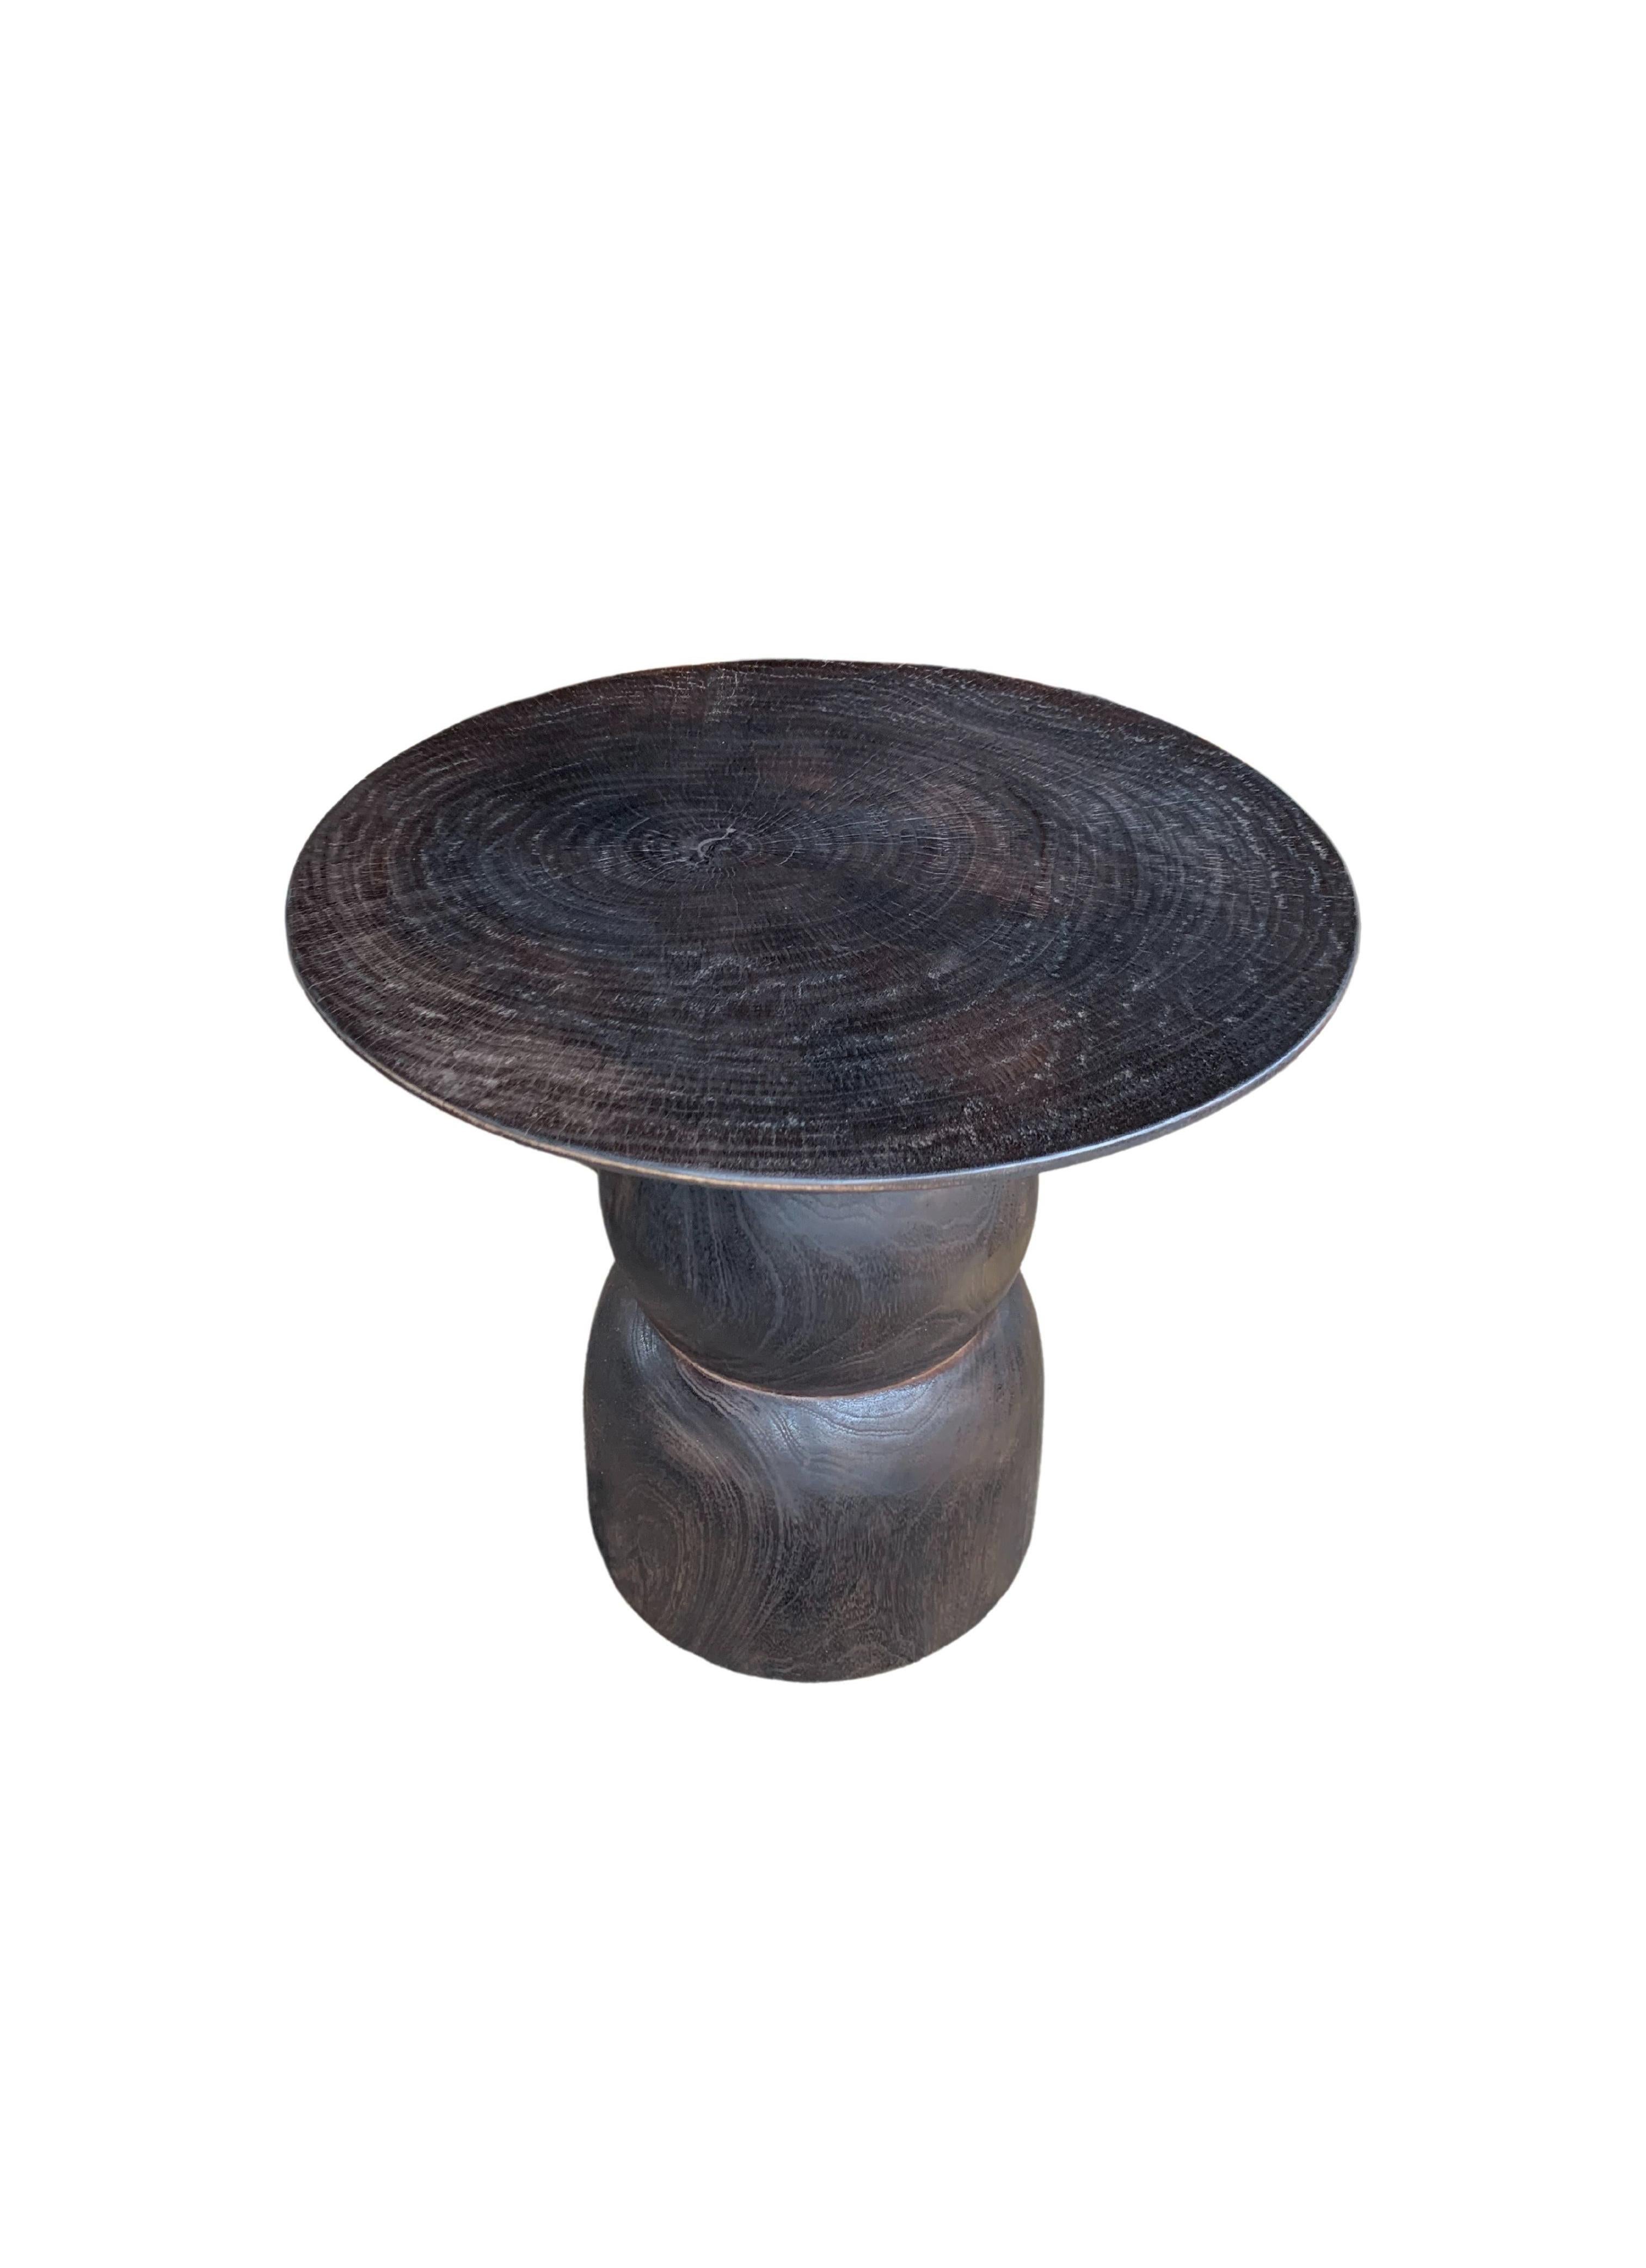 A wonderfully organic round side table. Its neutral pigment and subtle wood texture makes it perfect for any space. A uniquely sculptural and versatile piece, this table was crafted from mango wood and has a smooth texture. 

